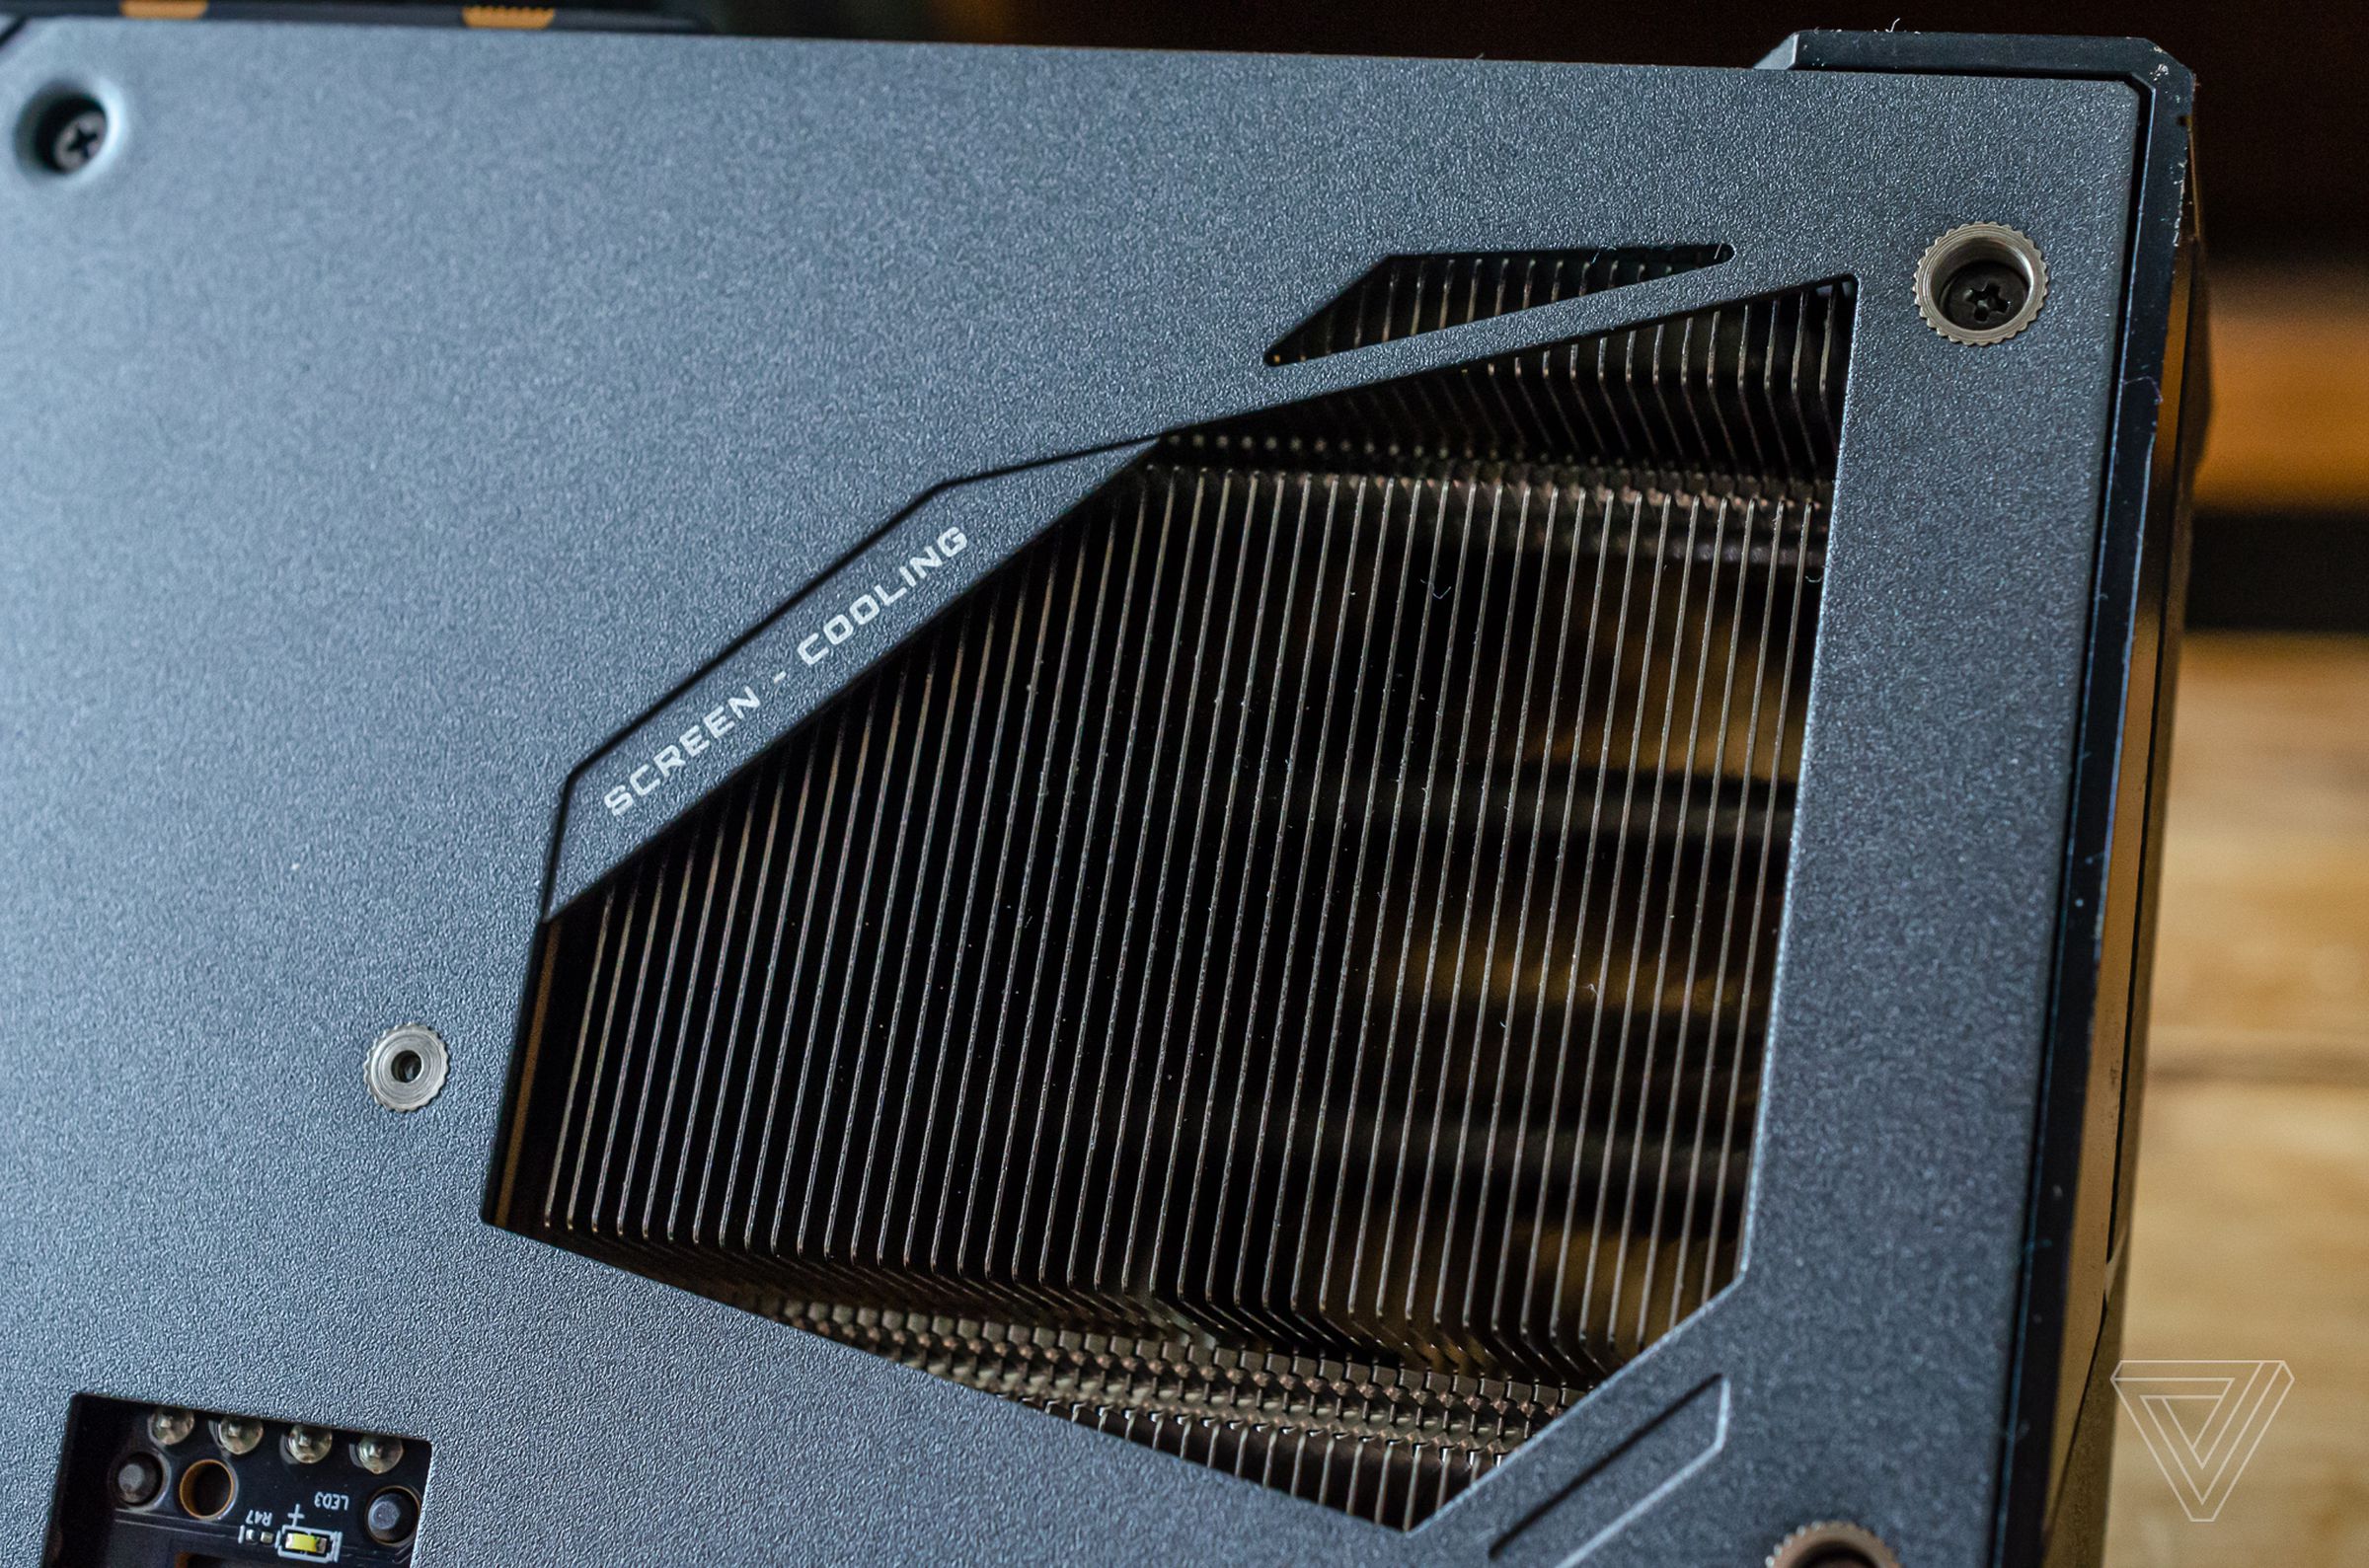 Gigabyte’s RX 6600 XT has a cutout to help with cooling.